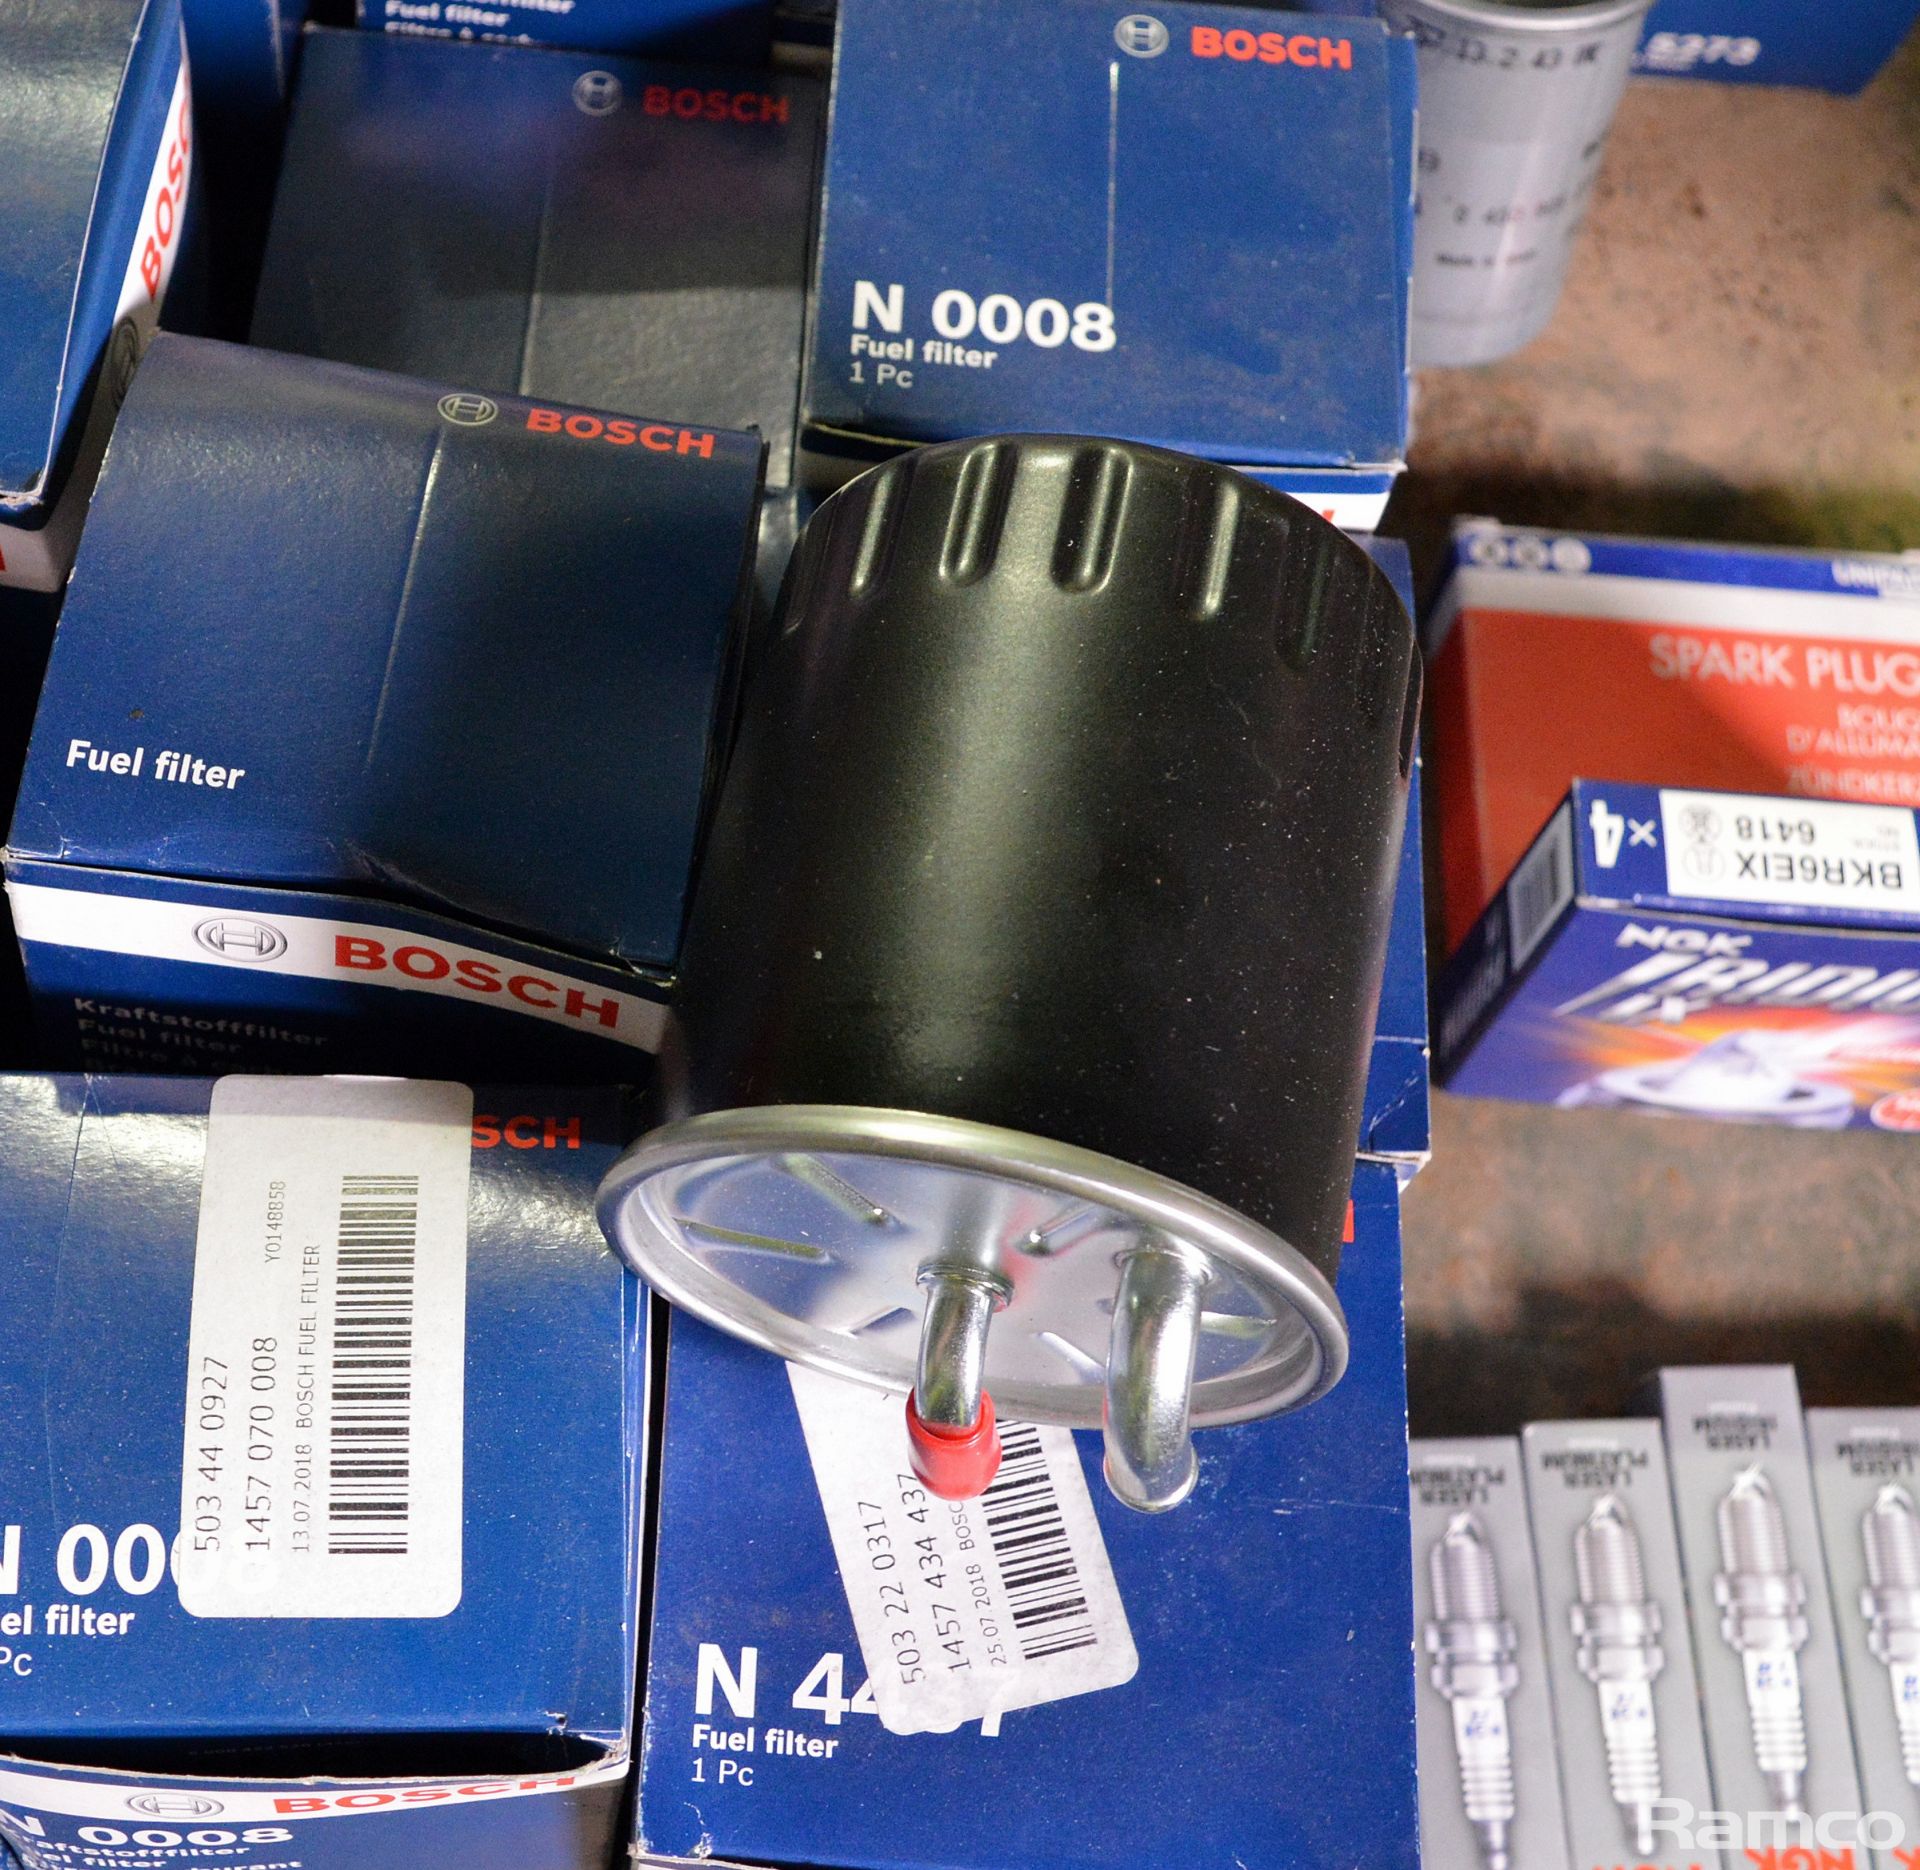 Spark plugs - NGK, Bosch, NGK Platinum, Bosch fuel filters, Glowplugs - see pictures for m - Image 3 of 6